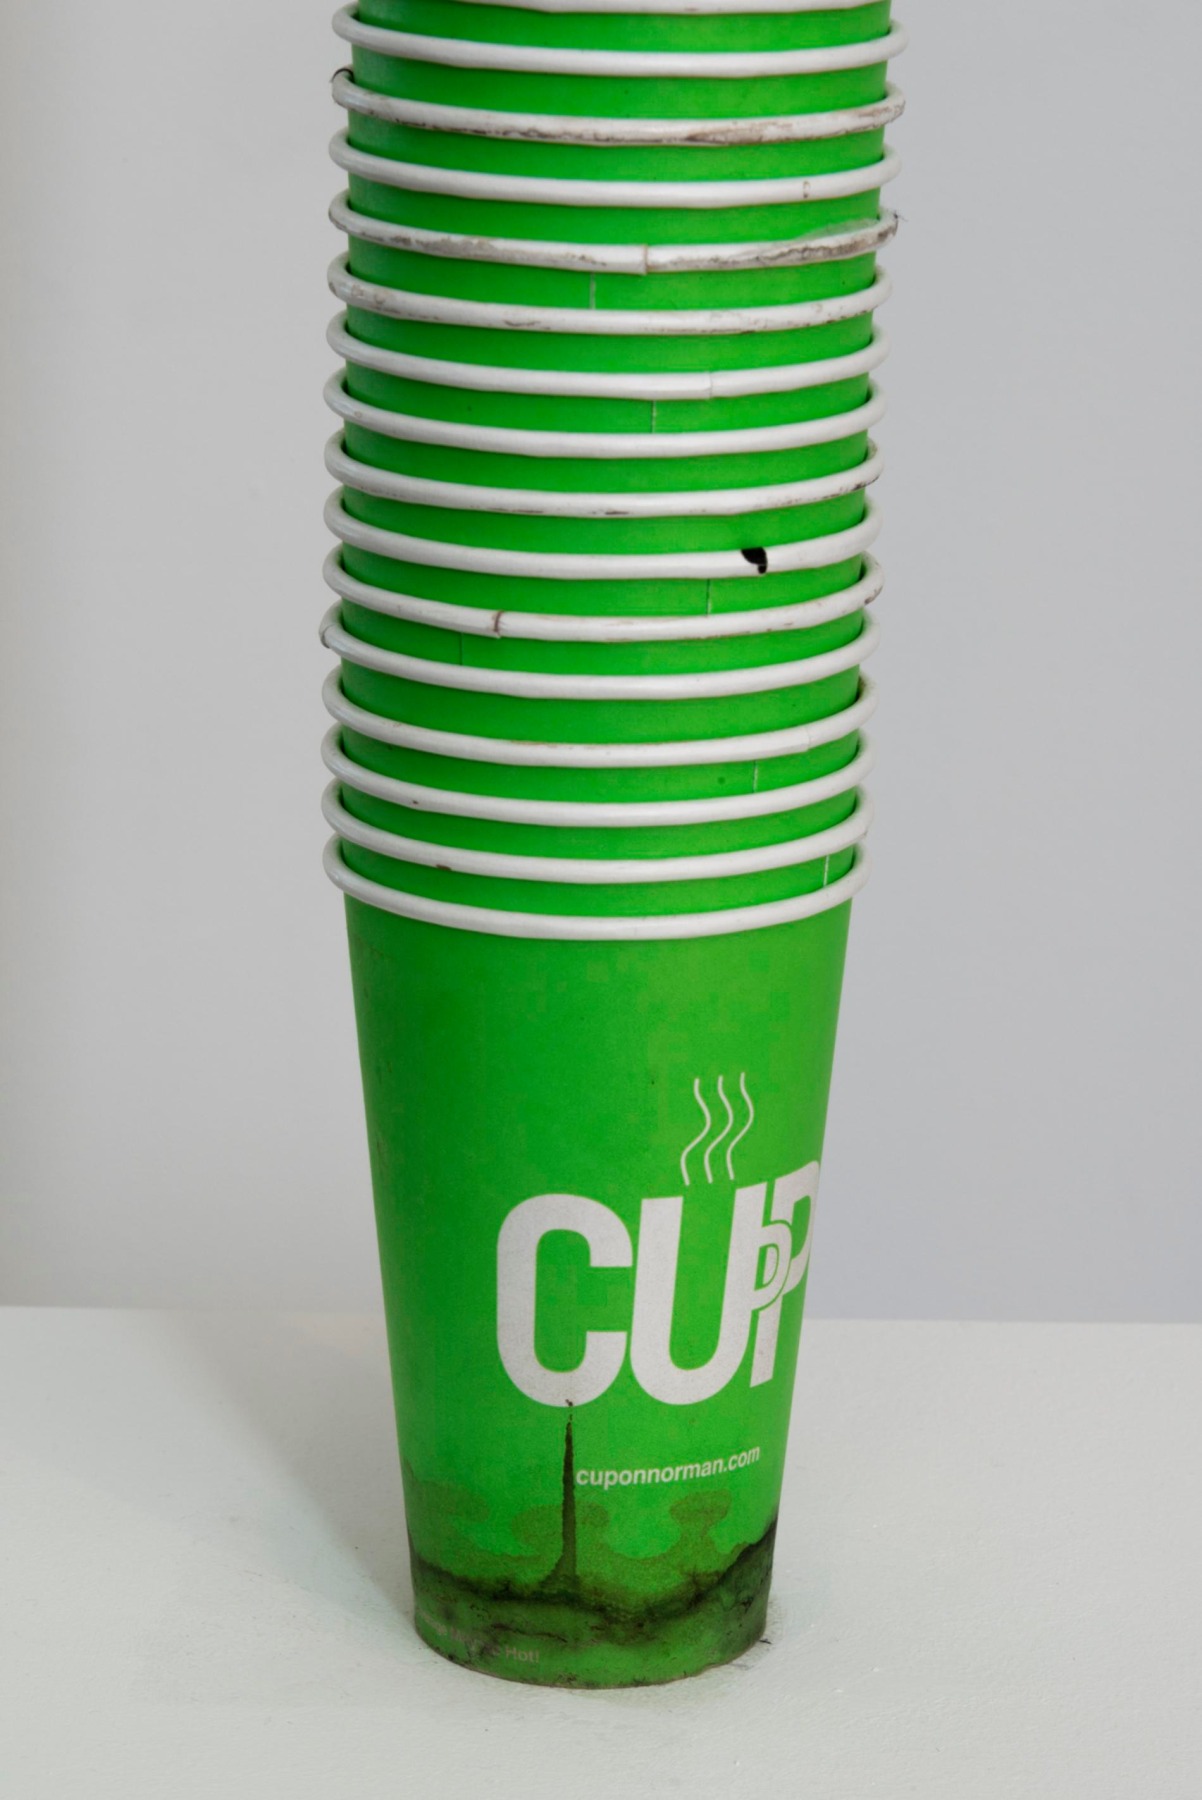 Detail shot of stacks of mostly green cups from pedestal to ceiling by SIMON EVANS&trade;.